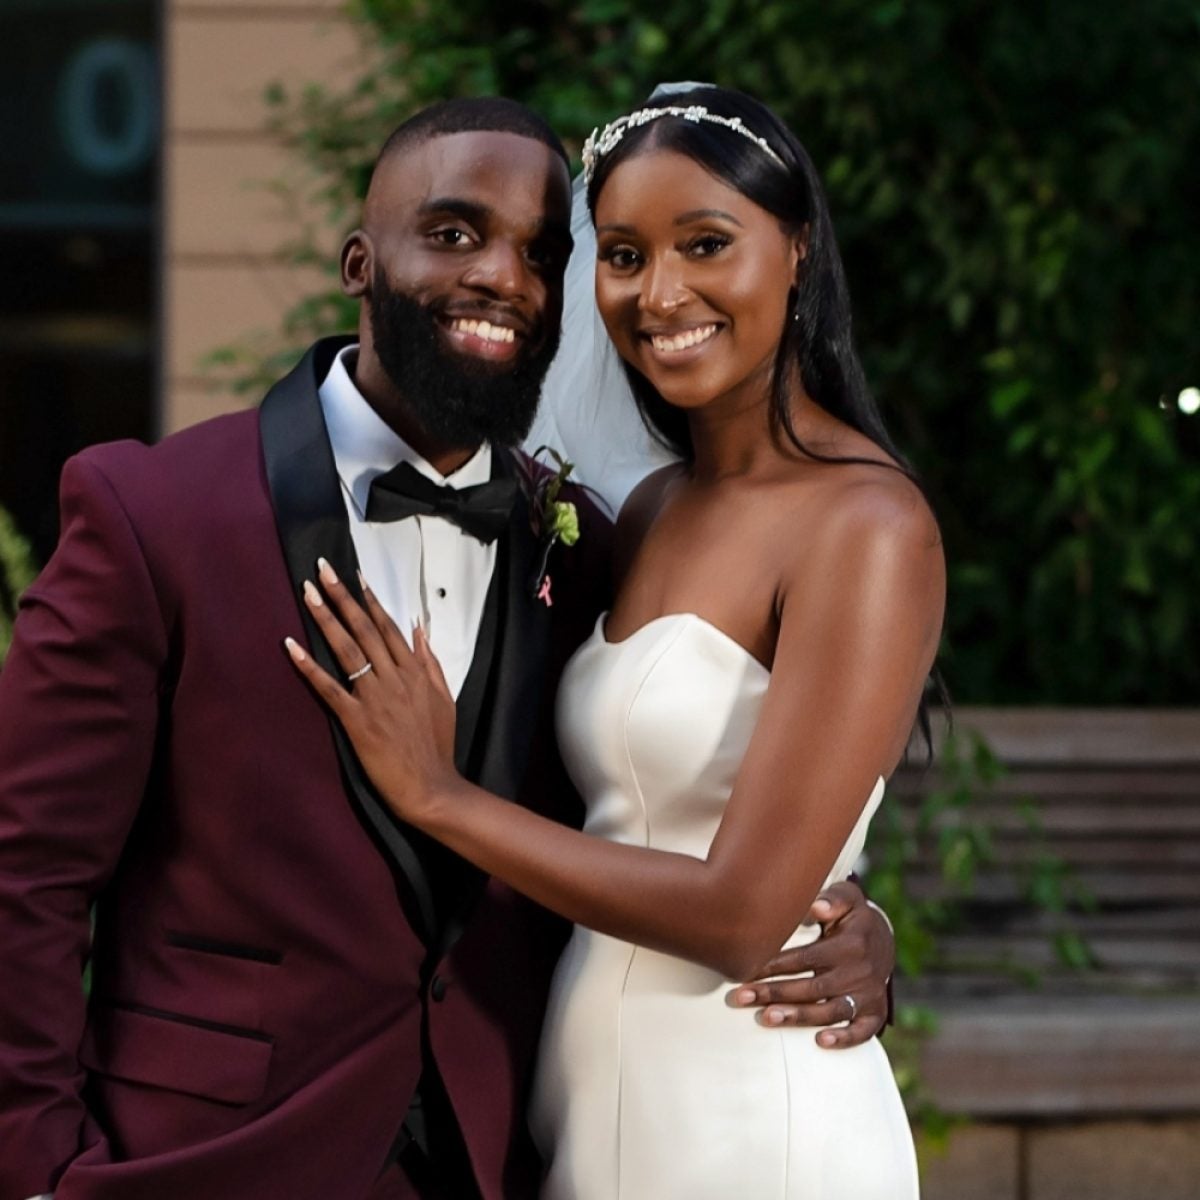 Meet The Black Couples Saying 'I Do' In Season 14 Of 'Married At First Sight' In Boston